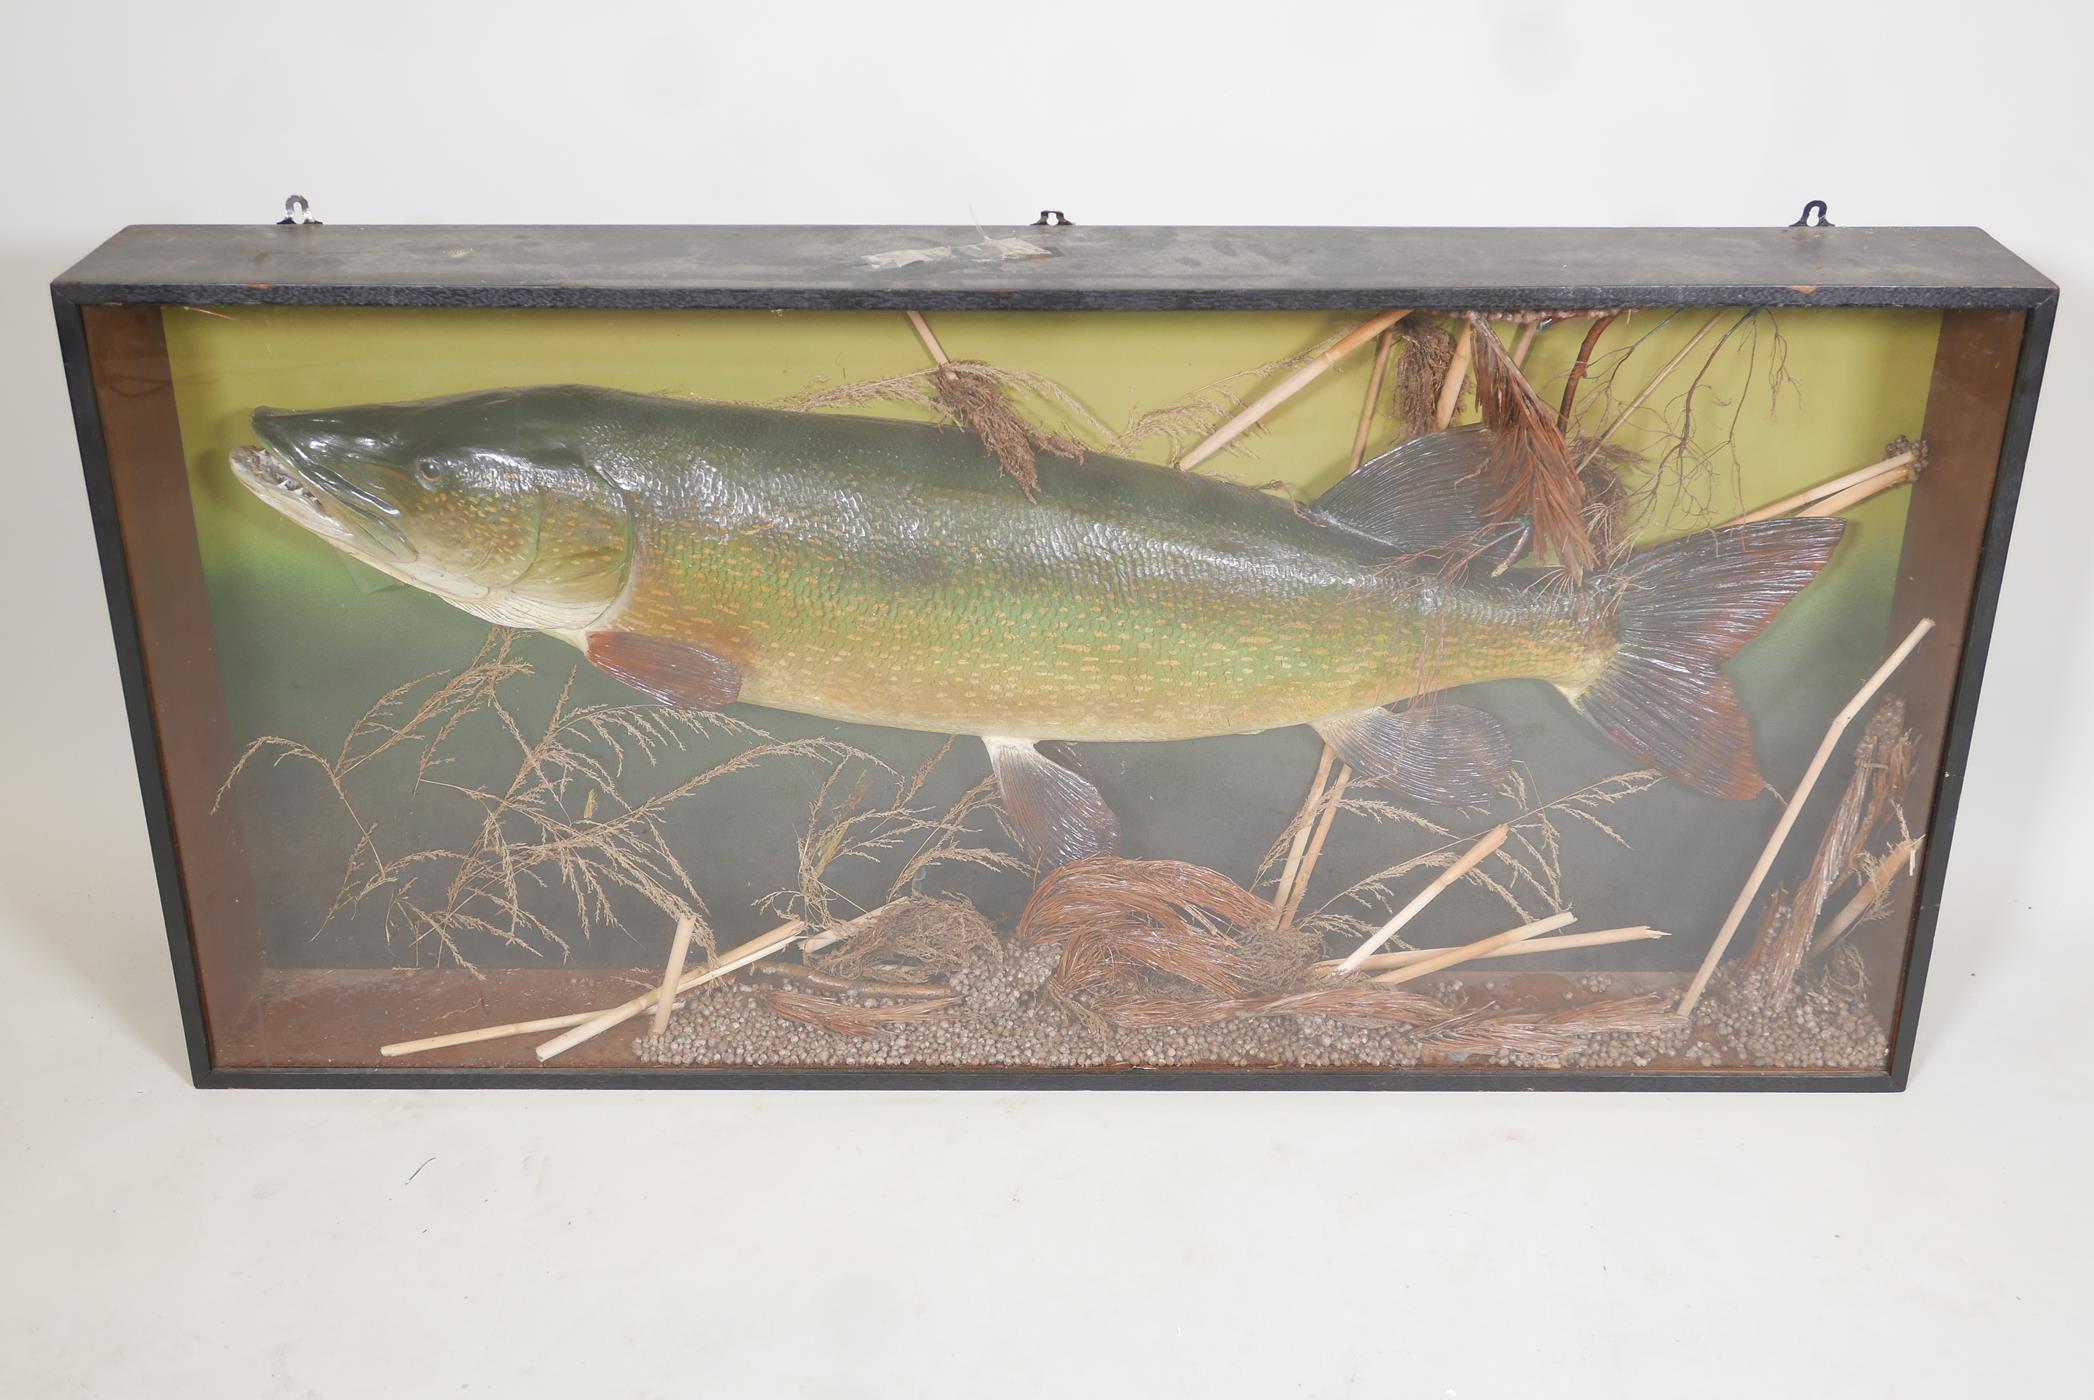 A composition model of a pike in a display case, 50" x 24" - Image 2 of 4